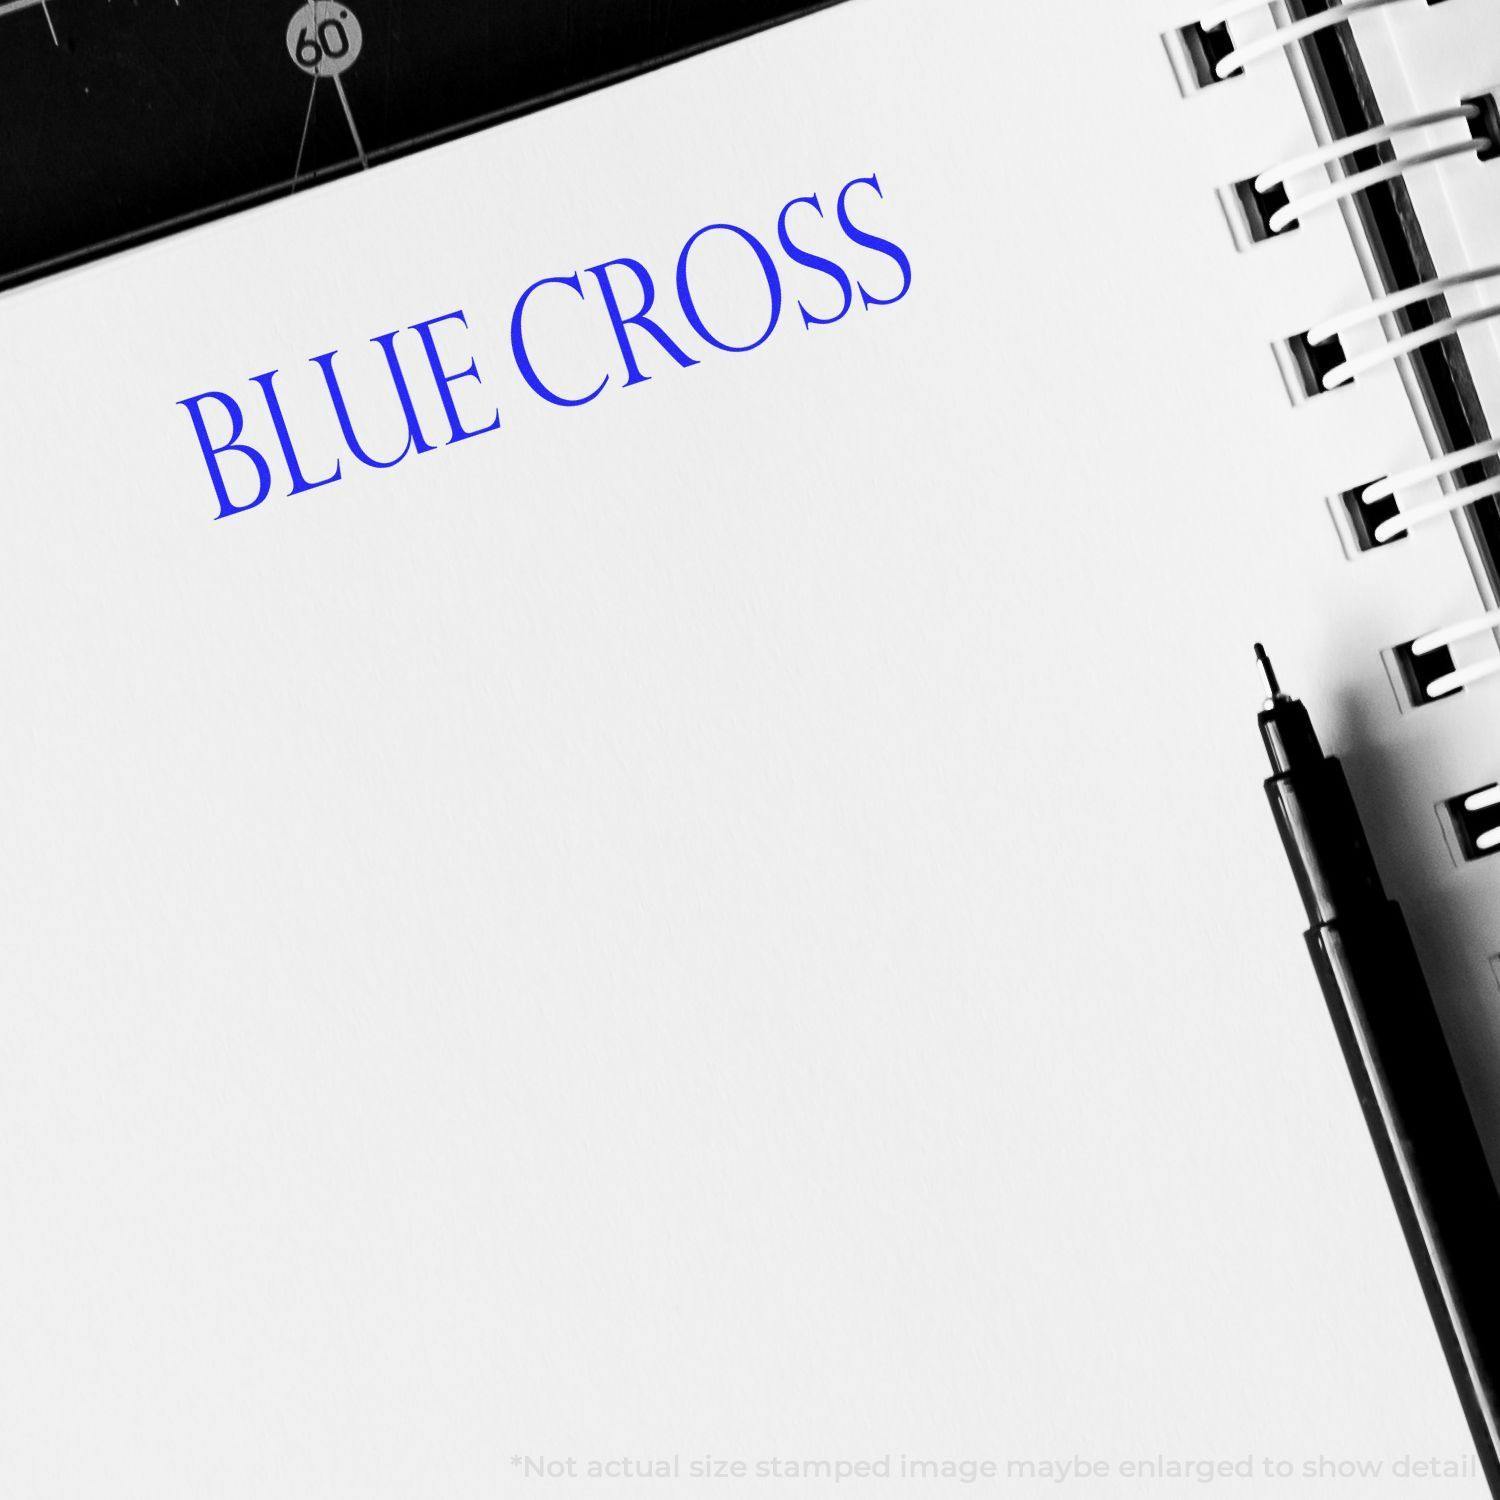 A self-inking stamp with a stamped image showing how the text "BLUE CROSS" in a large font is displayed by it.